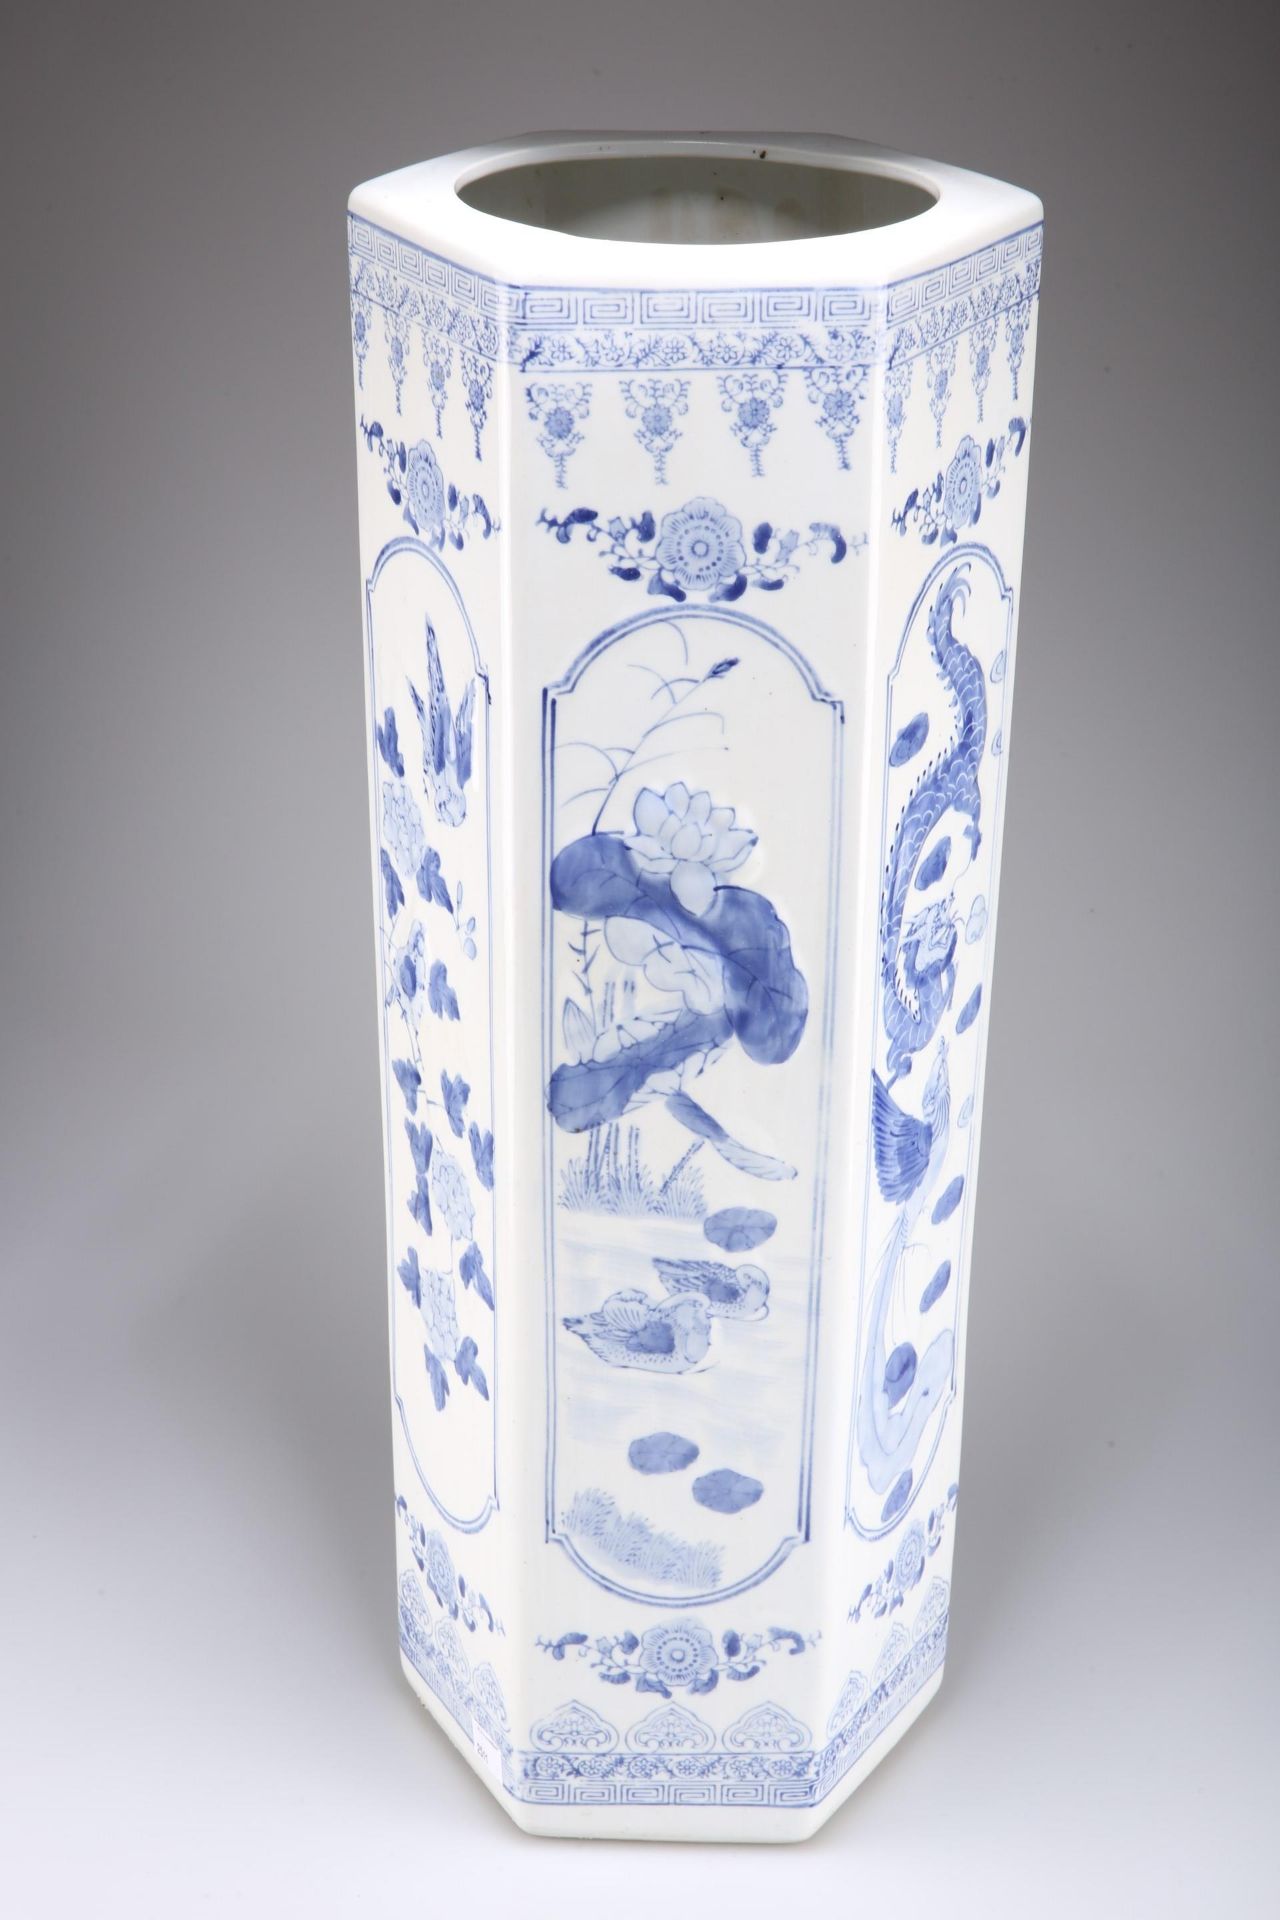 Oriental blue and white stickstand - Image 5 of 7